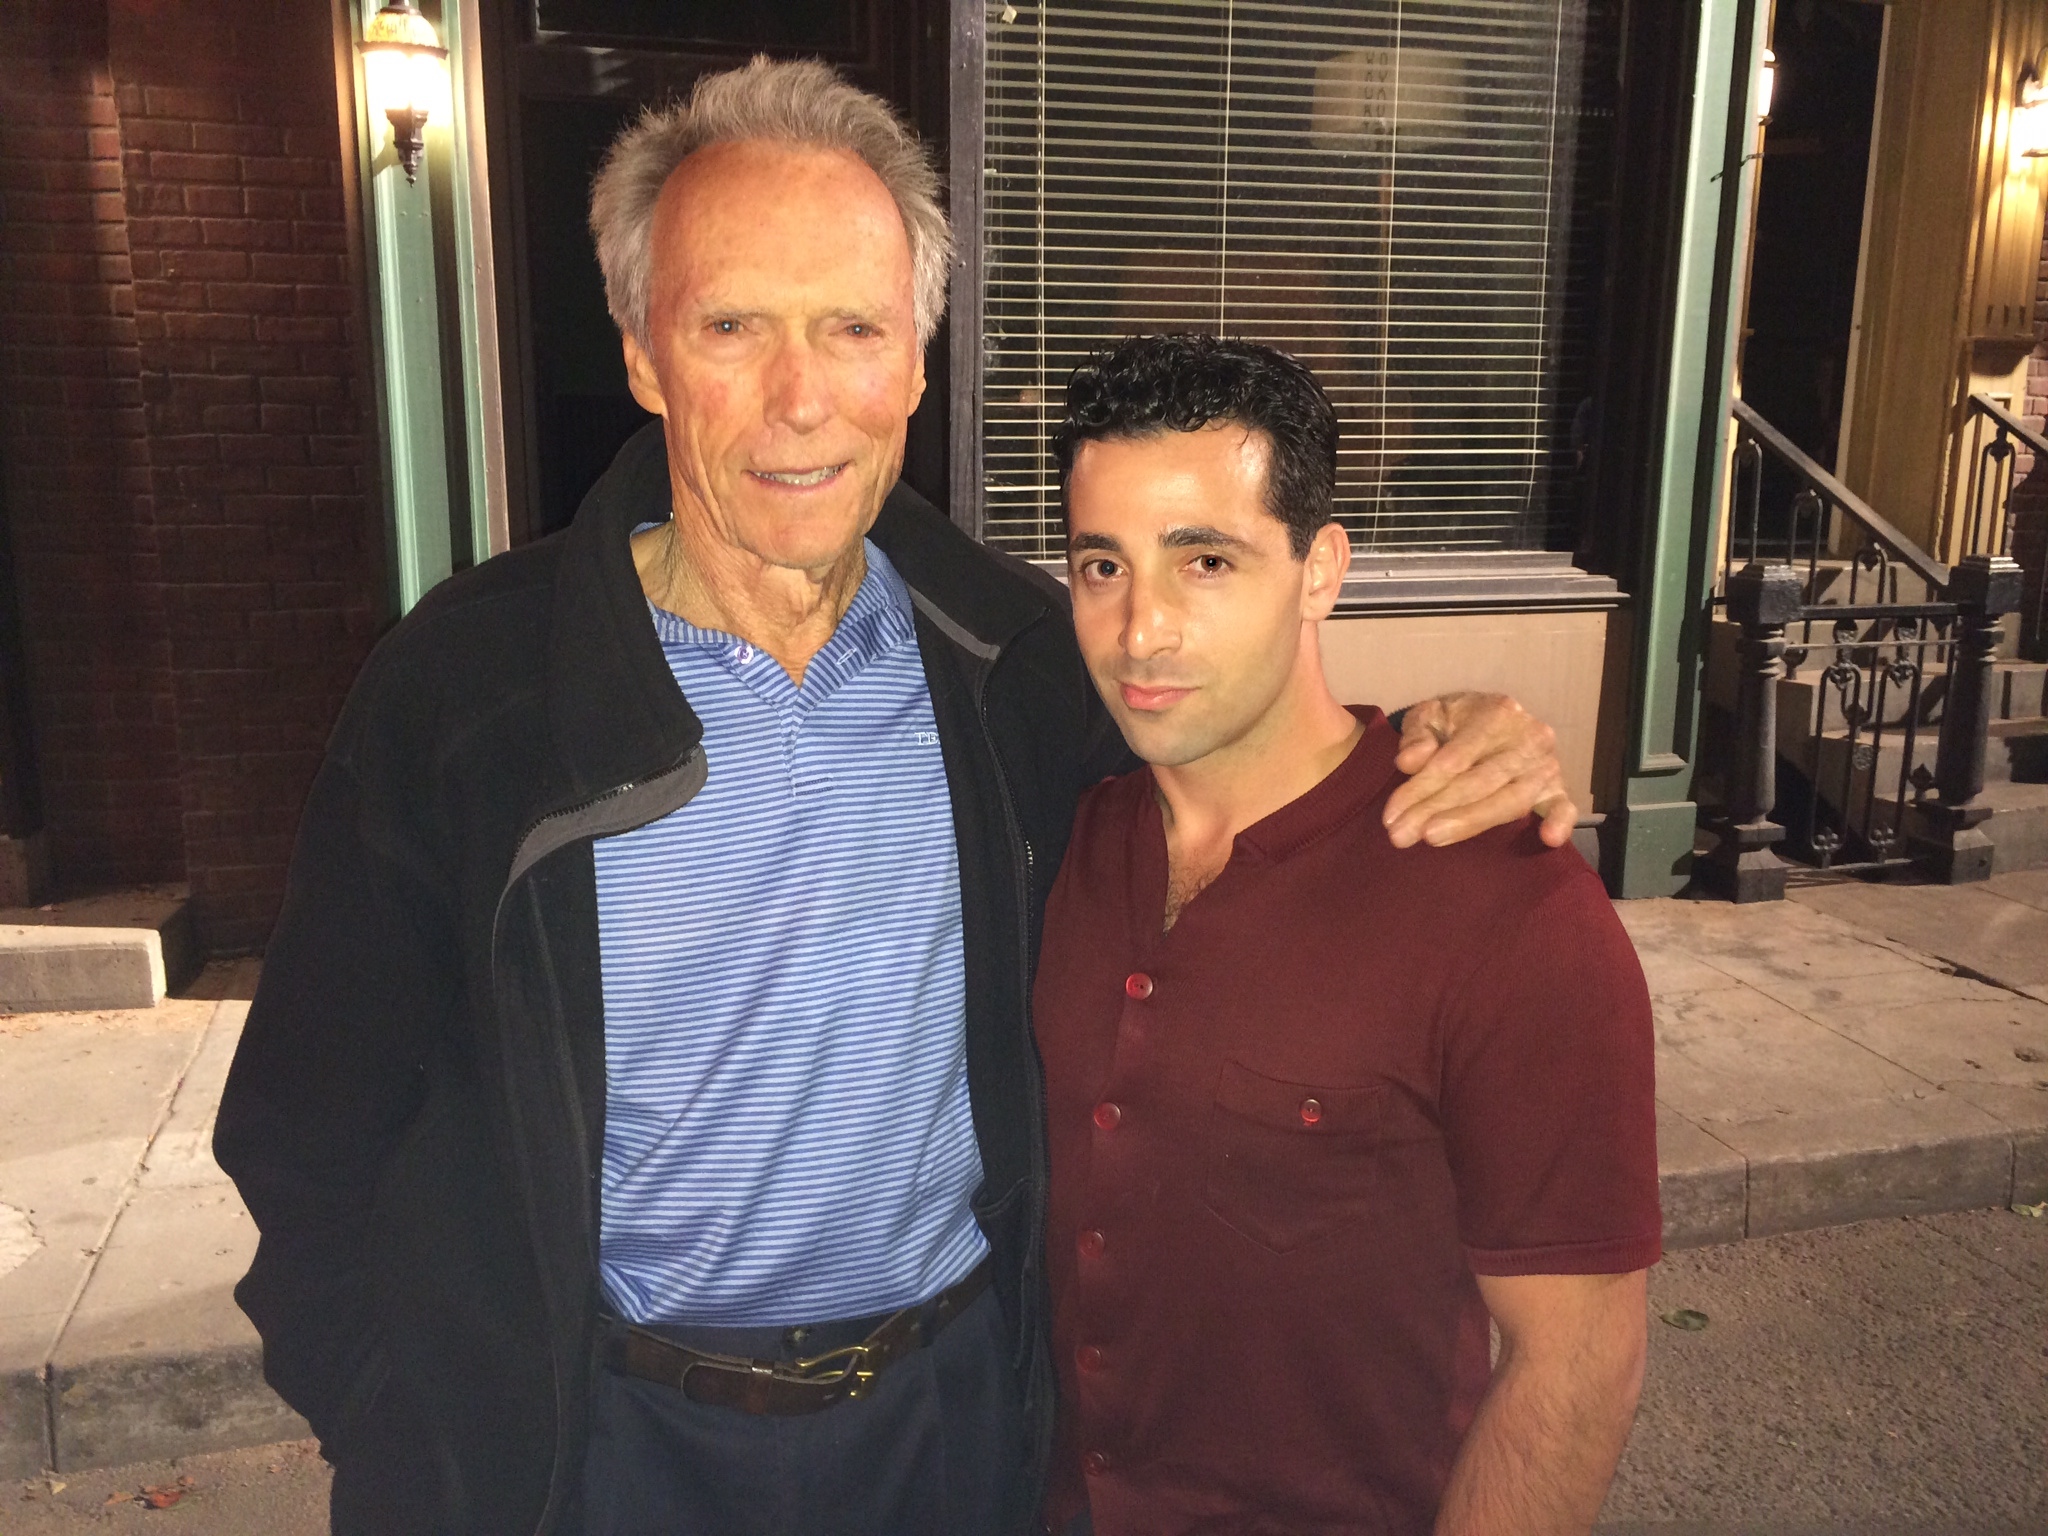 Clint Eastwood & Johnny Cannizzaro on the set of Jersey Boys.